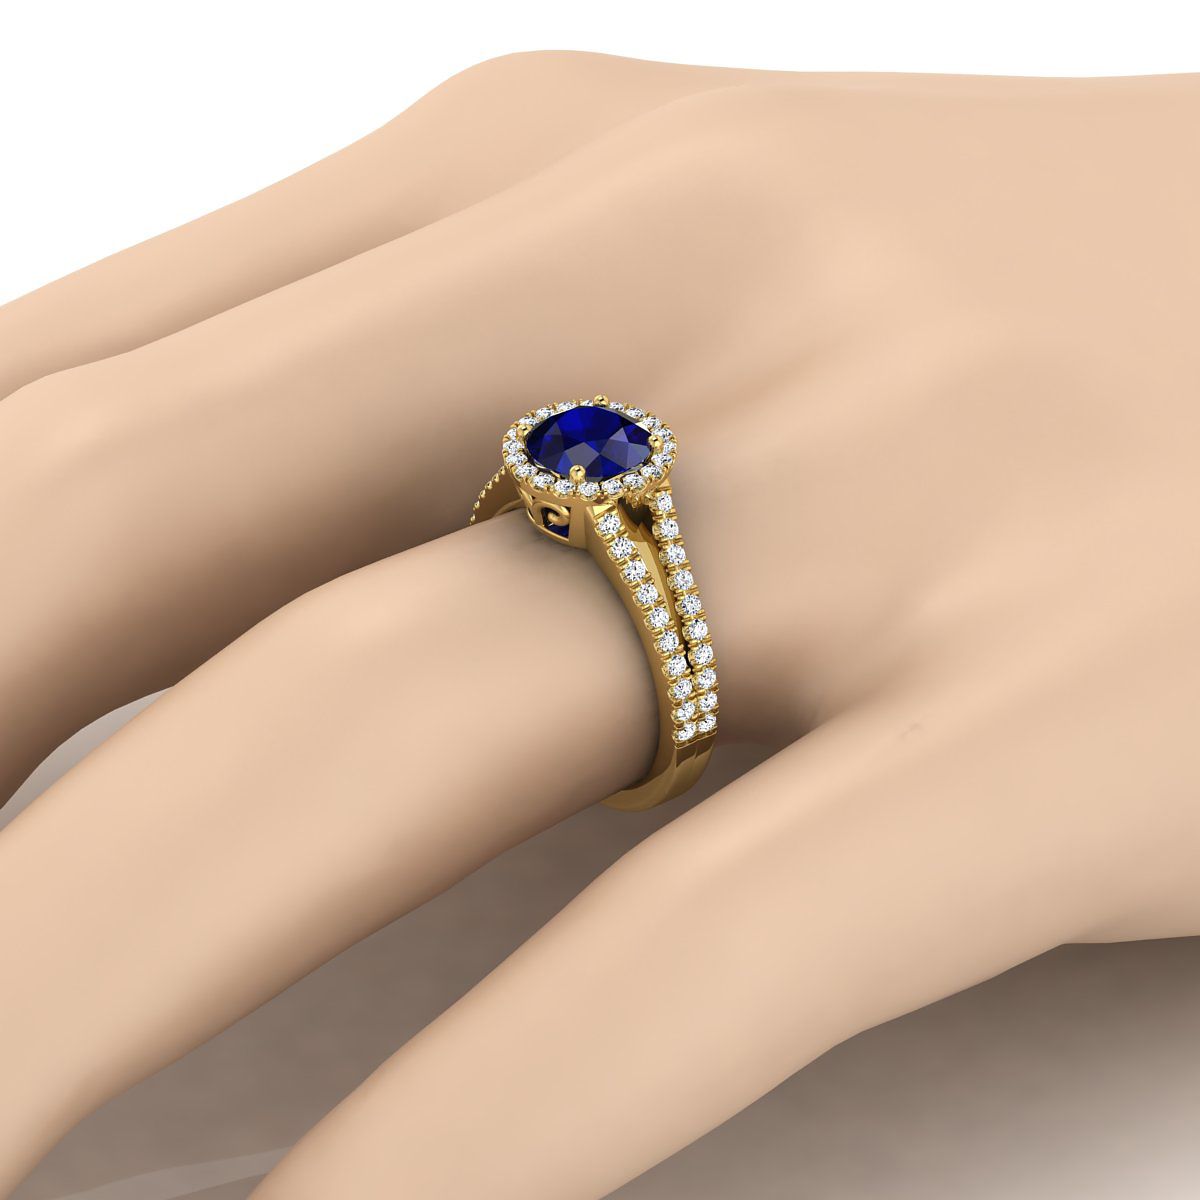 18K Yellow Gold Round Brilliant Sapphire Halo Center with French Pave Split Shank Engagement Ring -3/8ctw